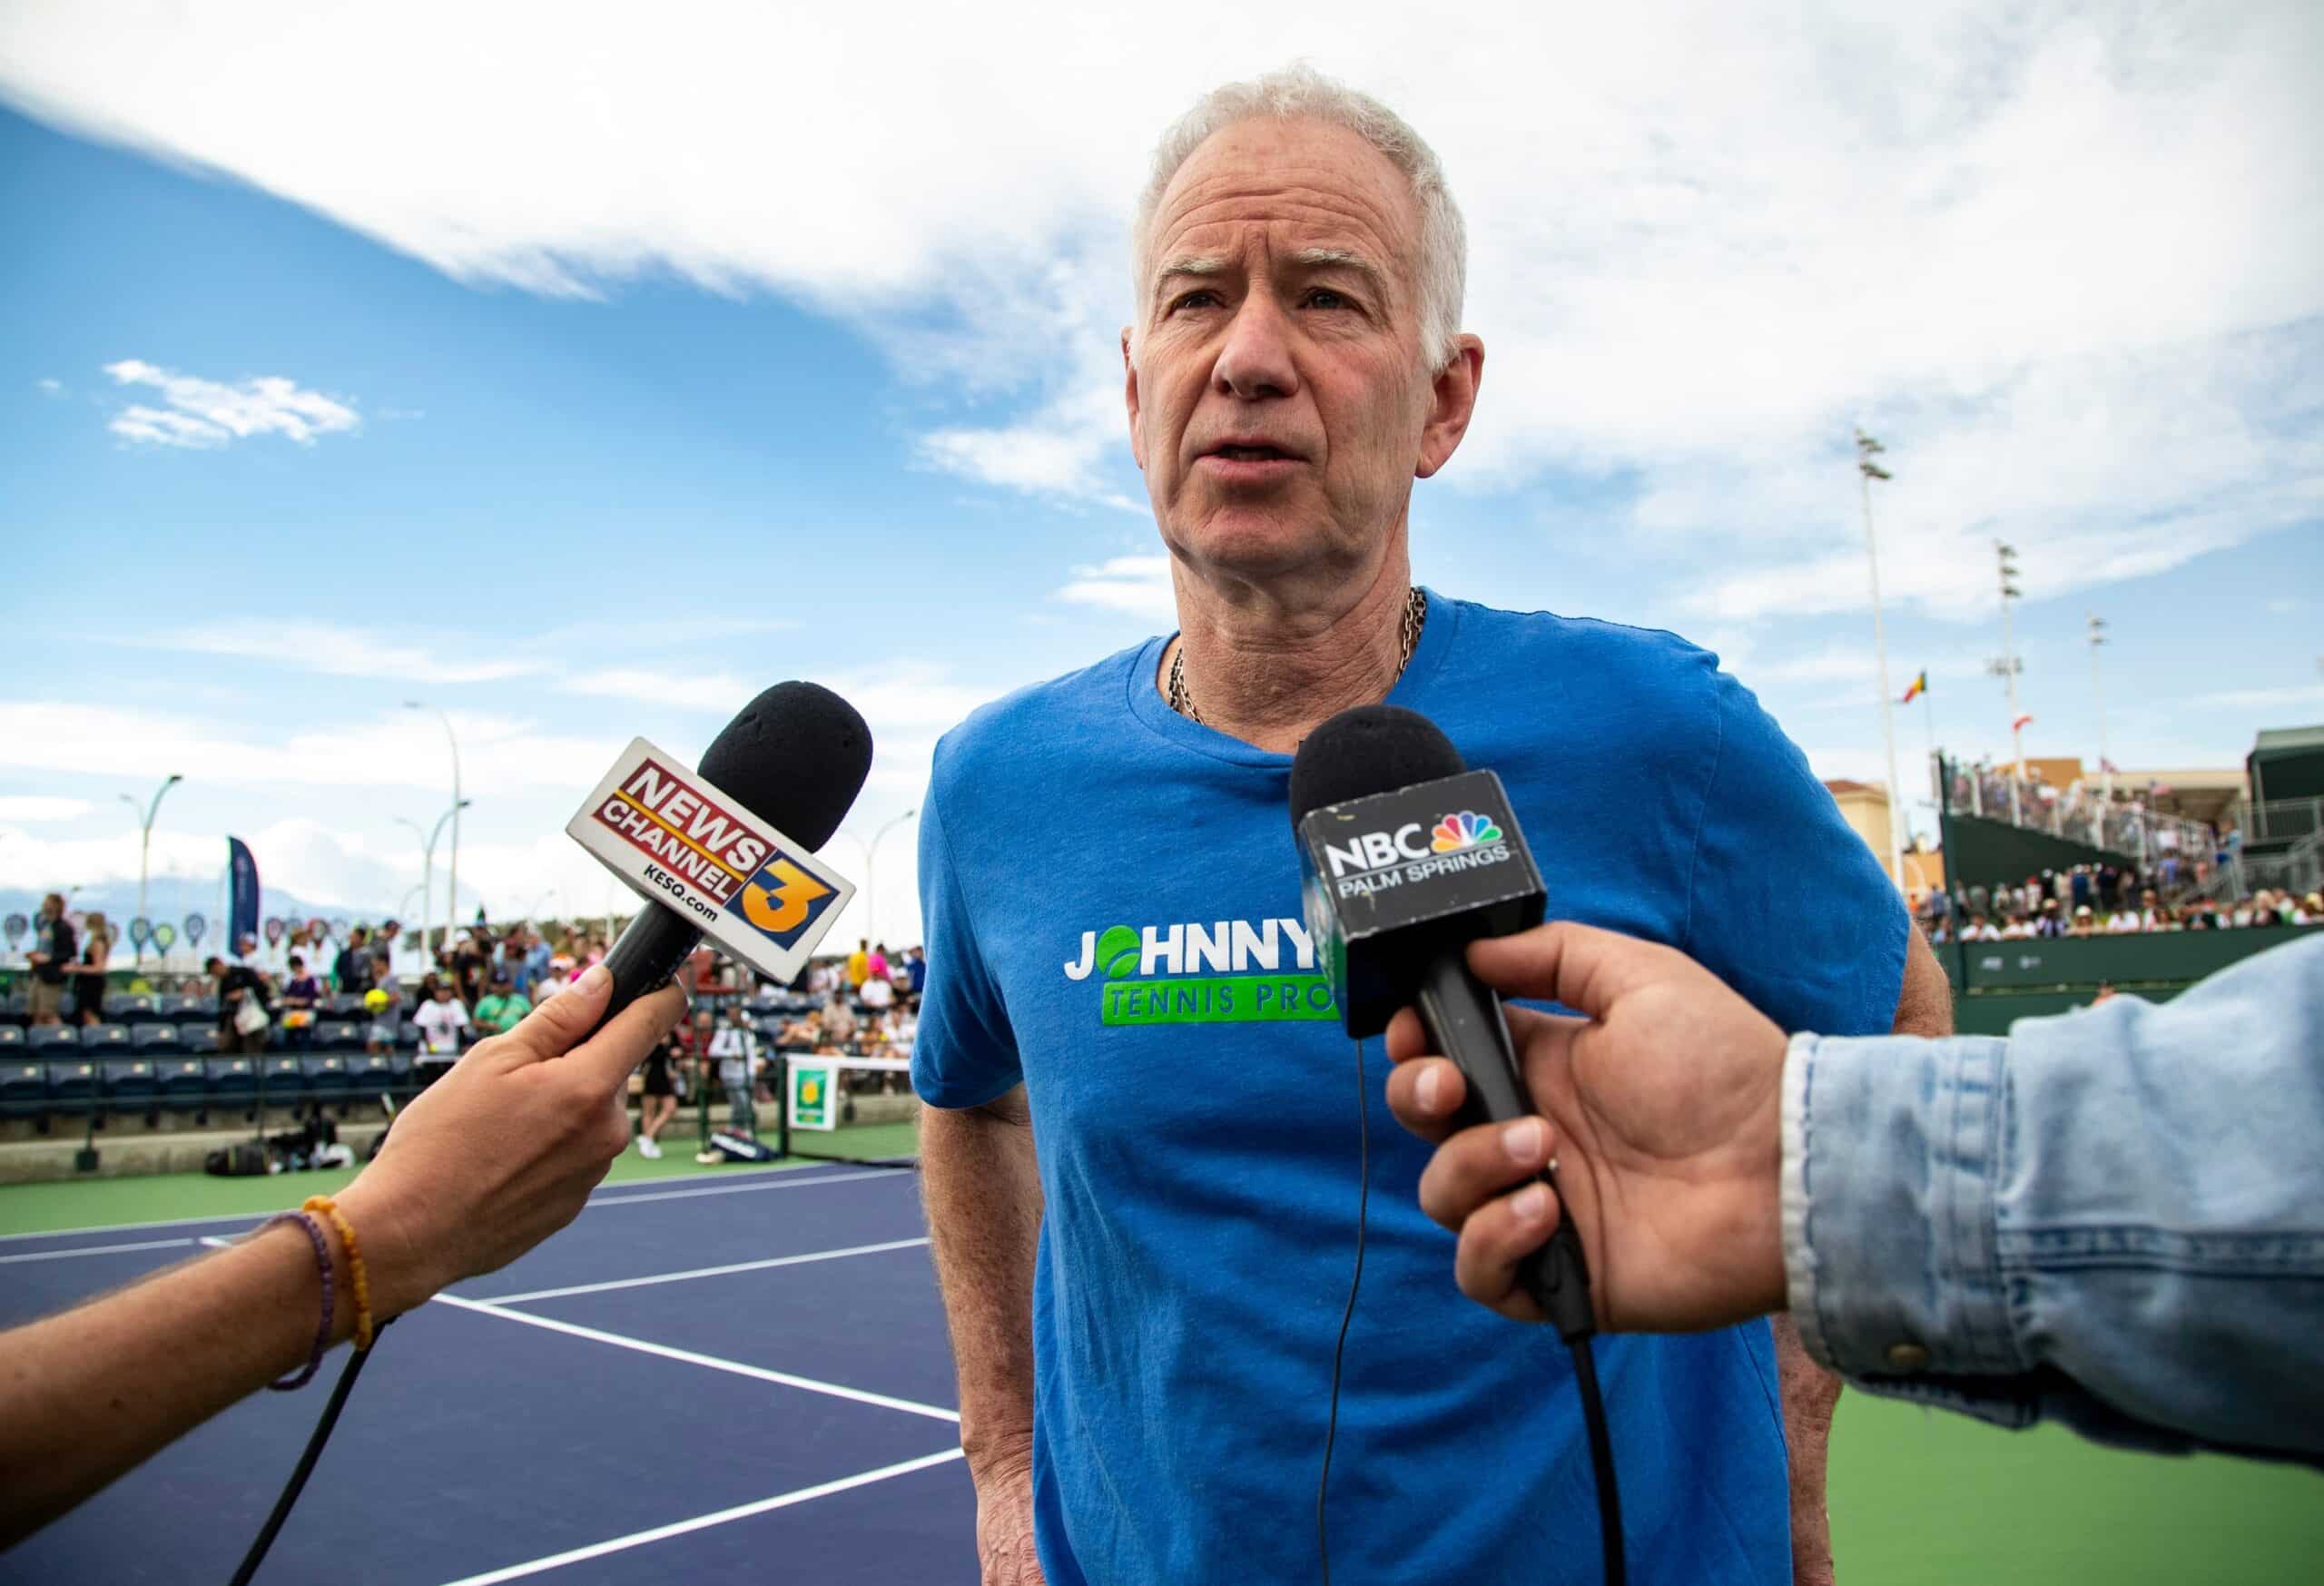 McEnroe "wouldn't encourage" the ATP's investment talks with Saudi Arabia.